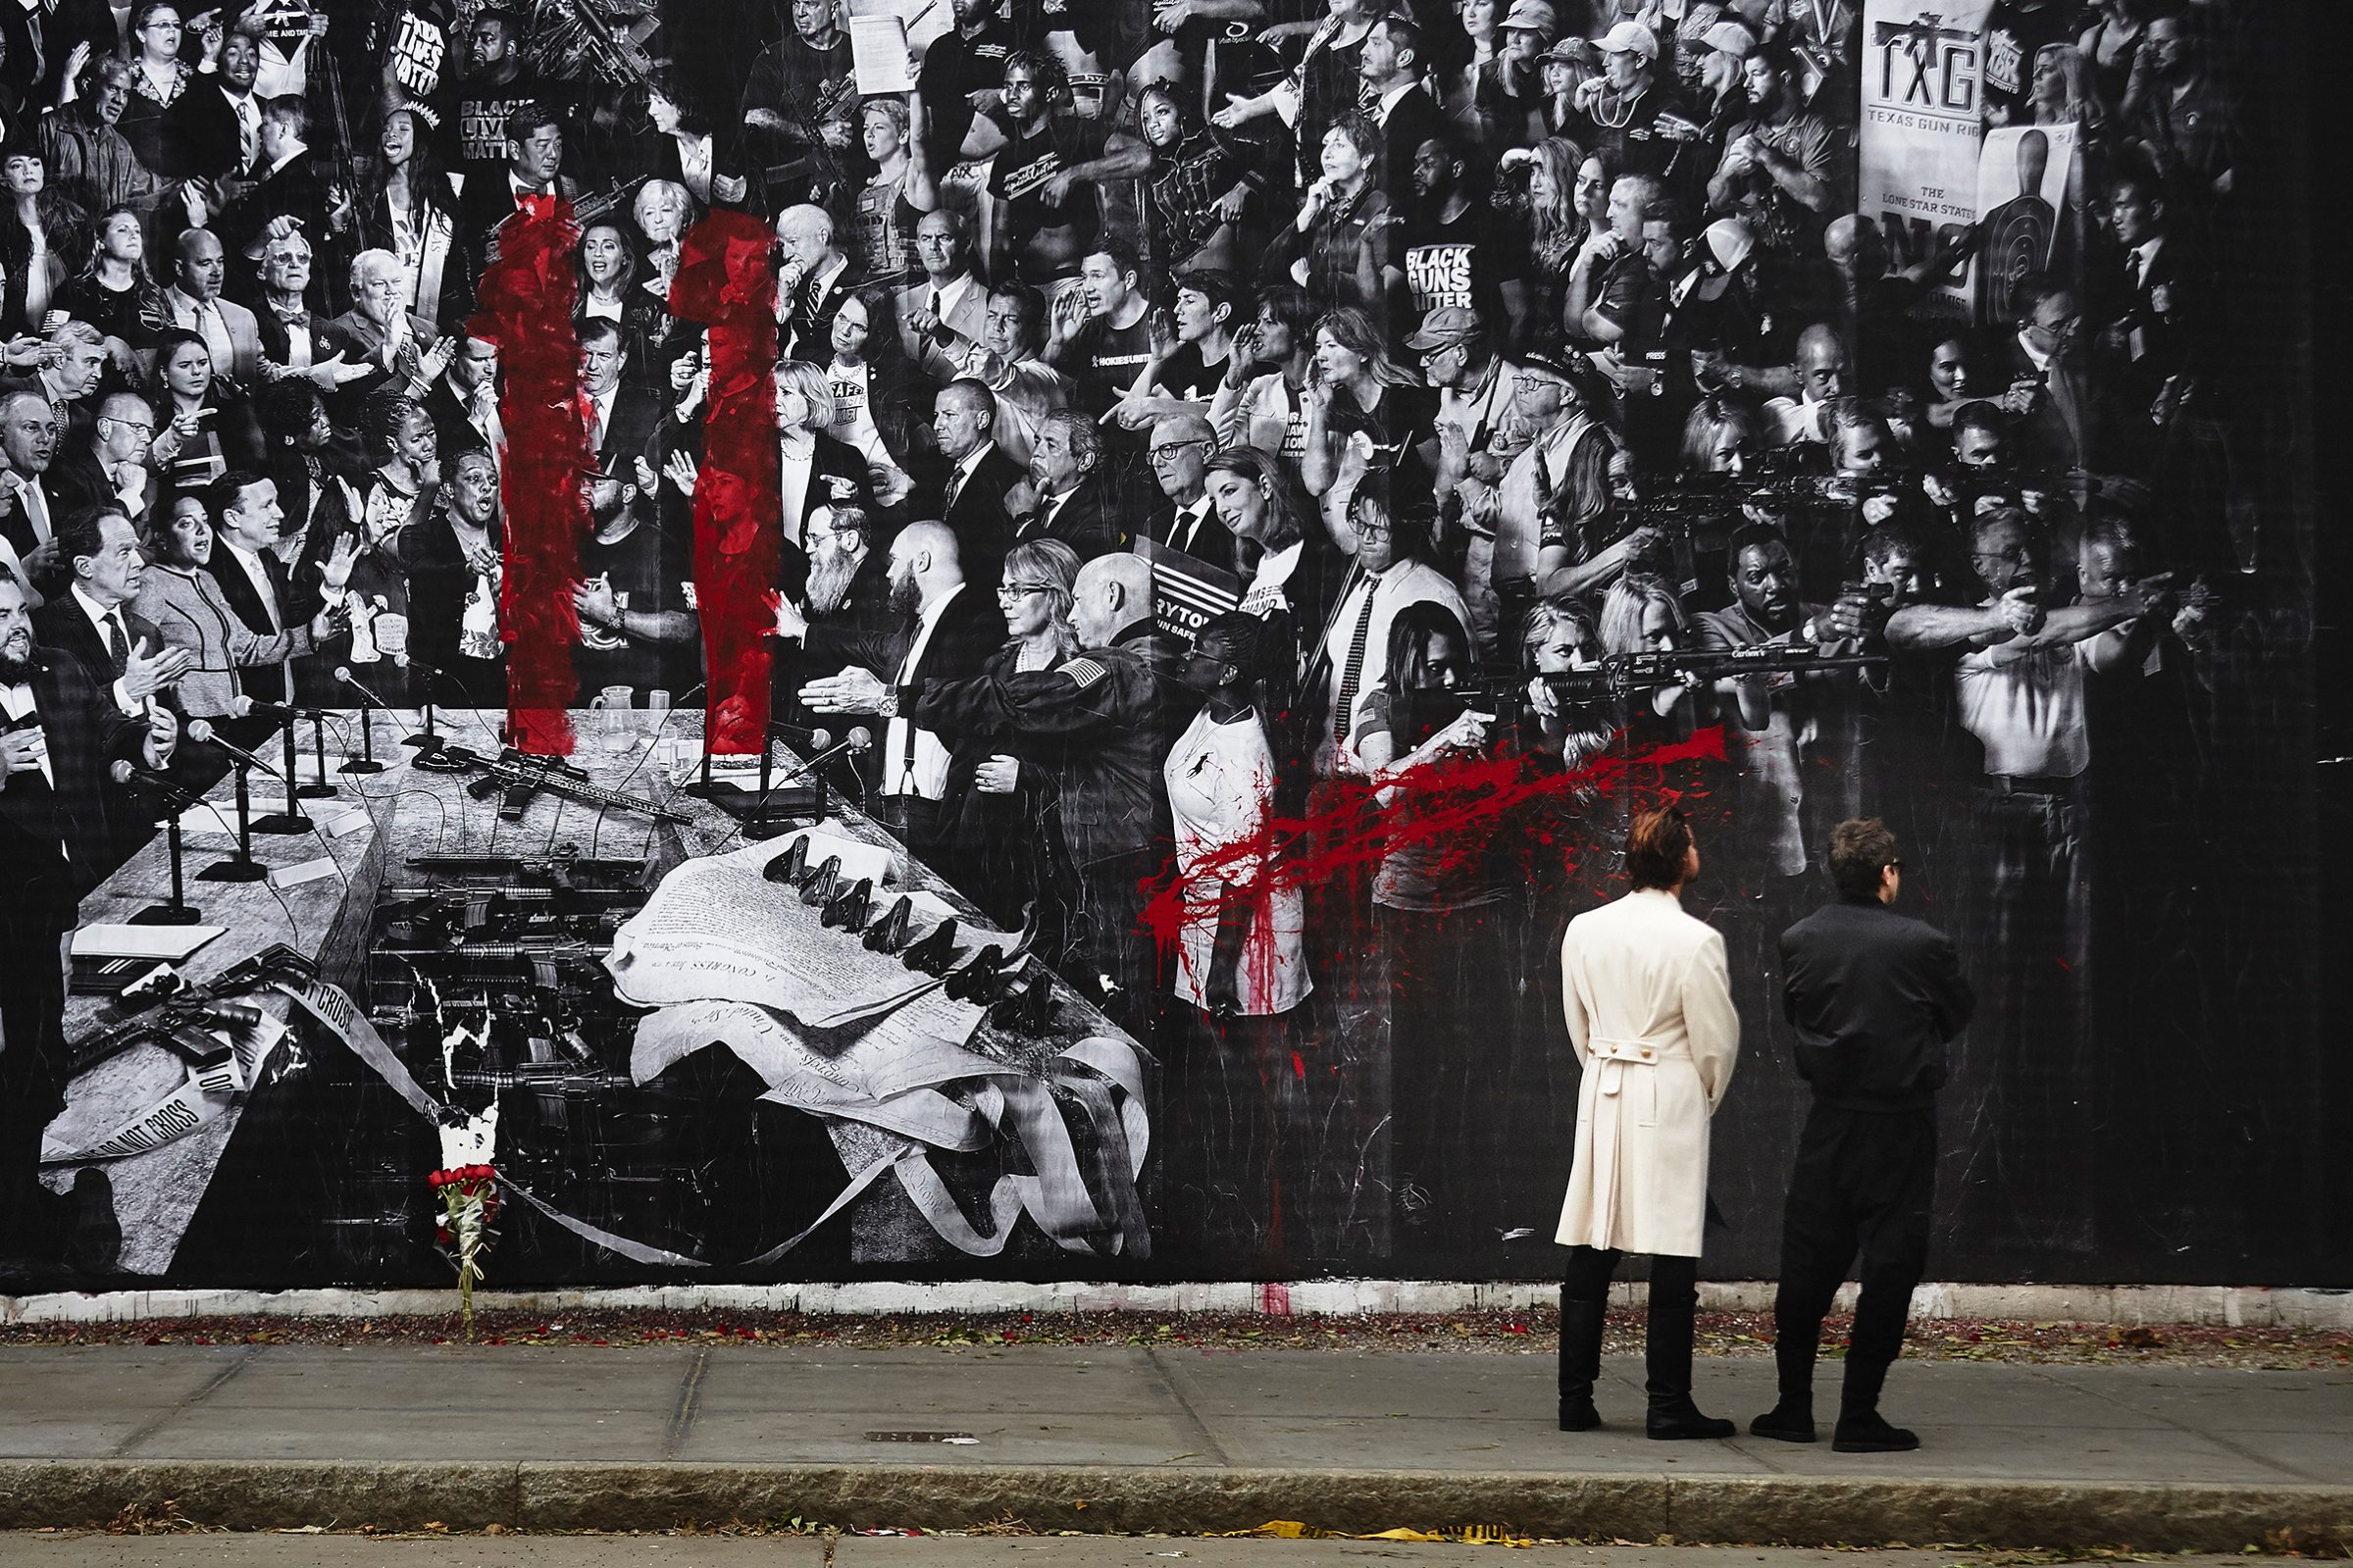 A red spray painted number 11, an apparent reference to the individuals slain in Pittsburgh, is seen on the "Guns in America" mural created by TIME and the artist JR on the Houston Bowery Wall in New York City.